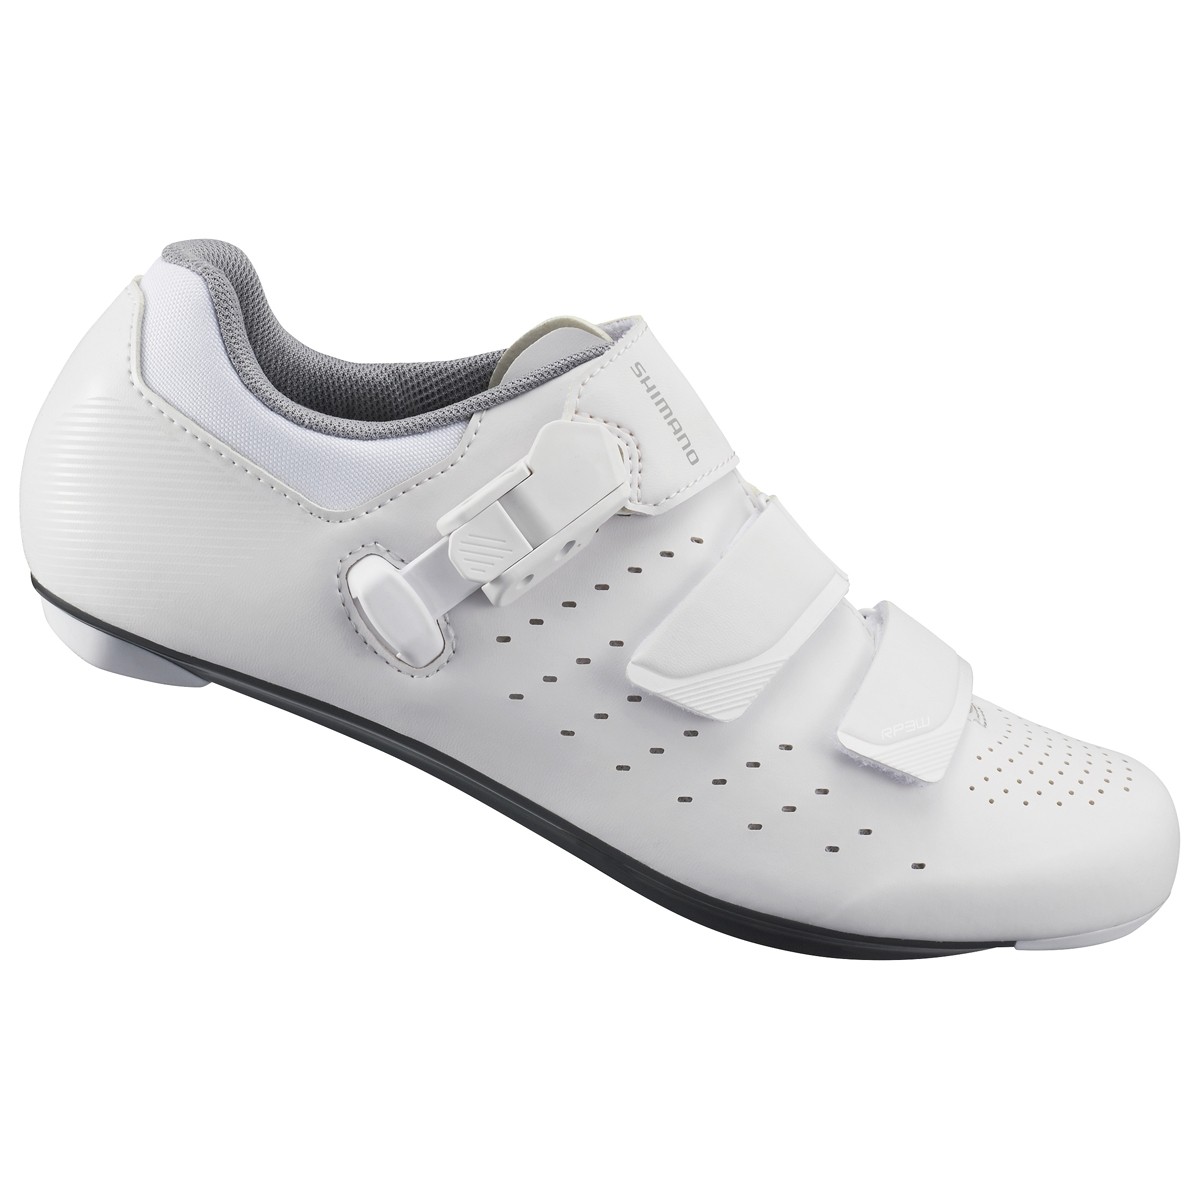 Shimano rp301 chaussures route femme blanc